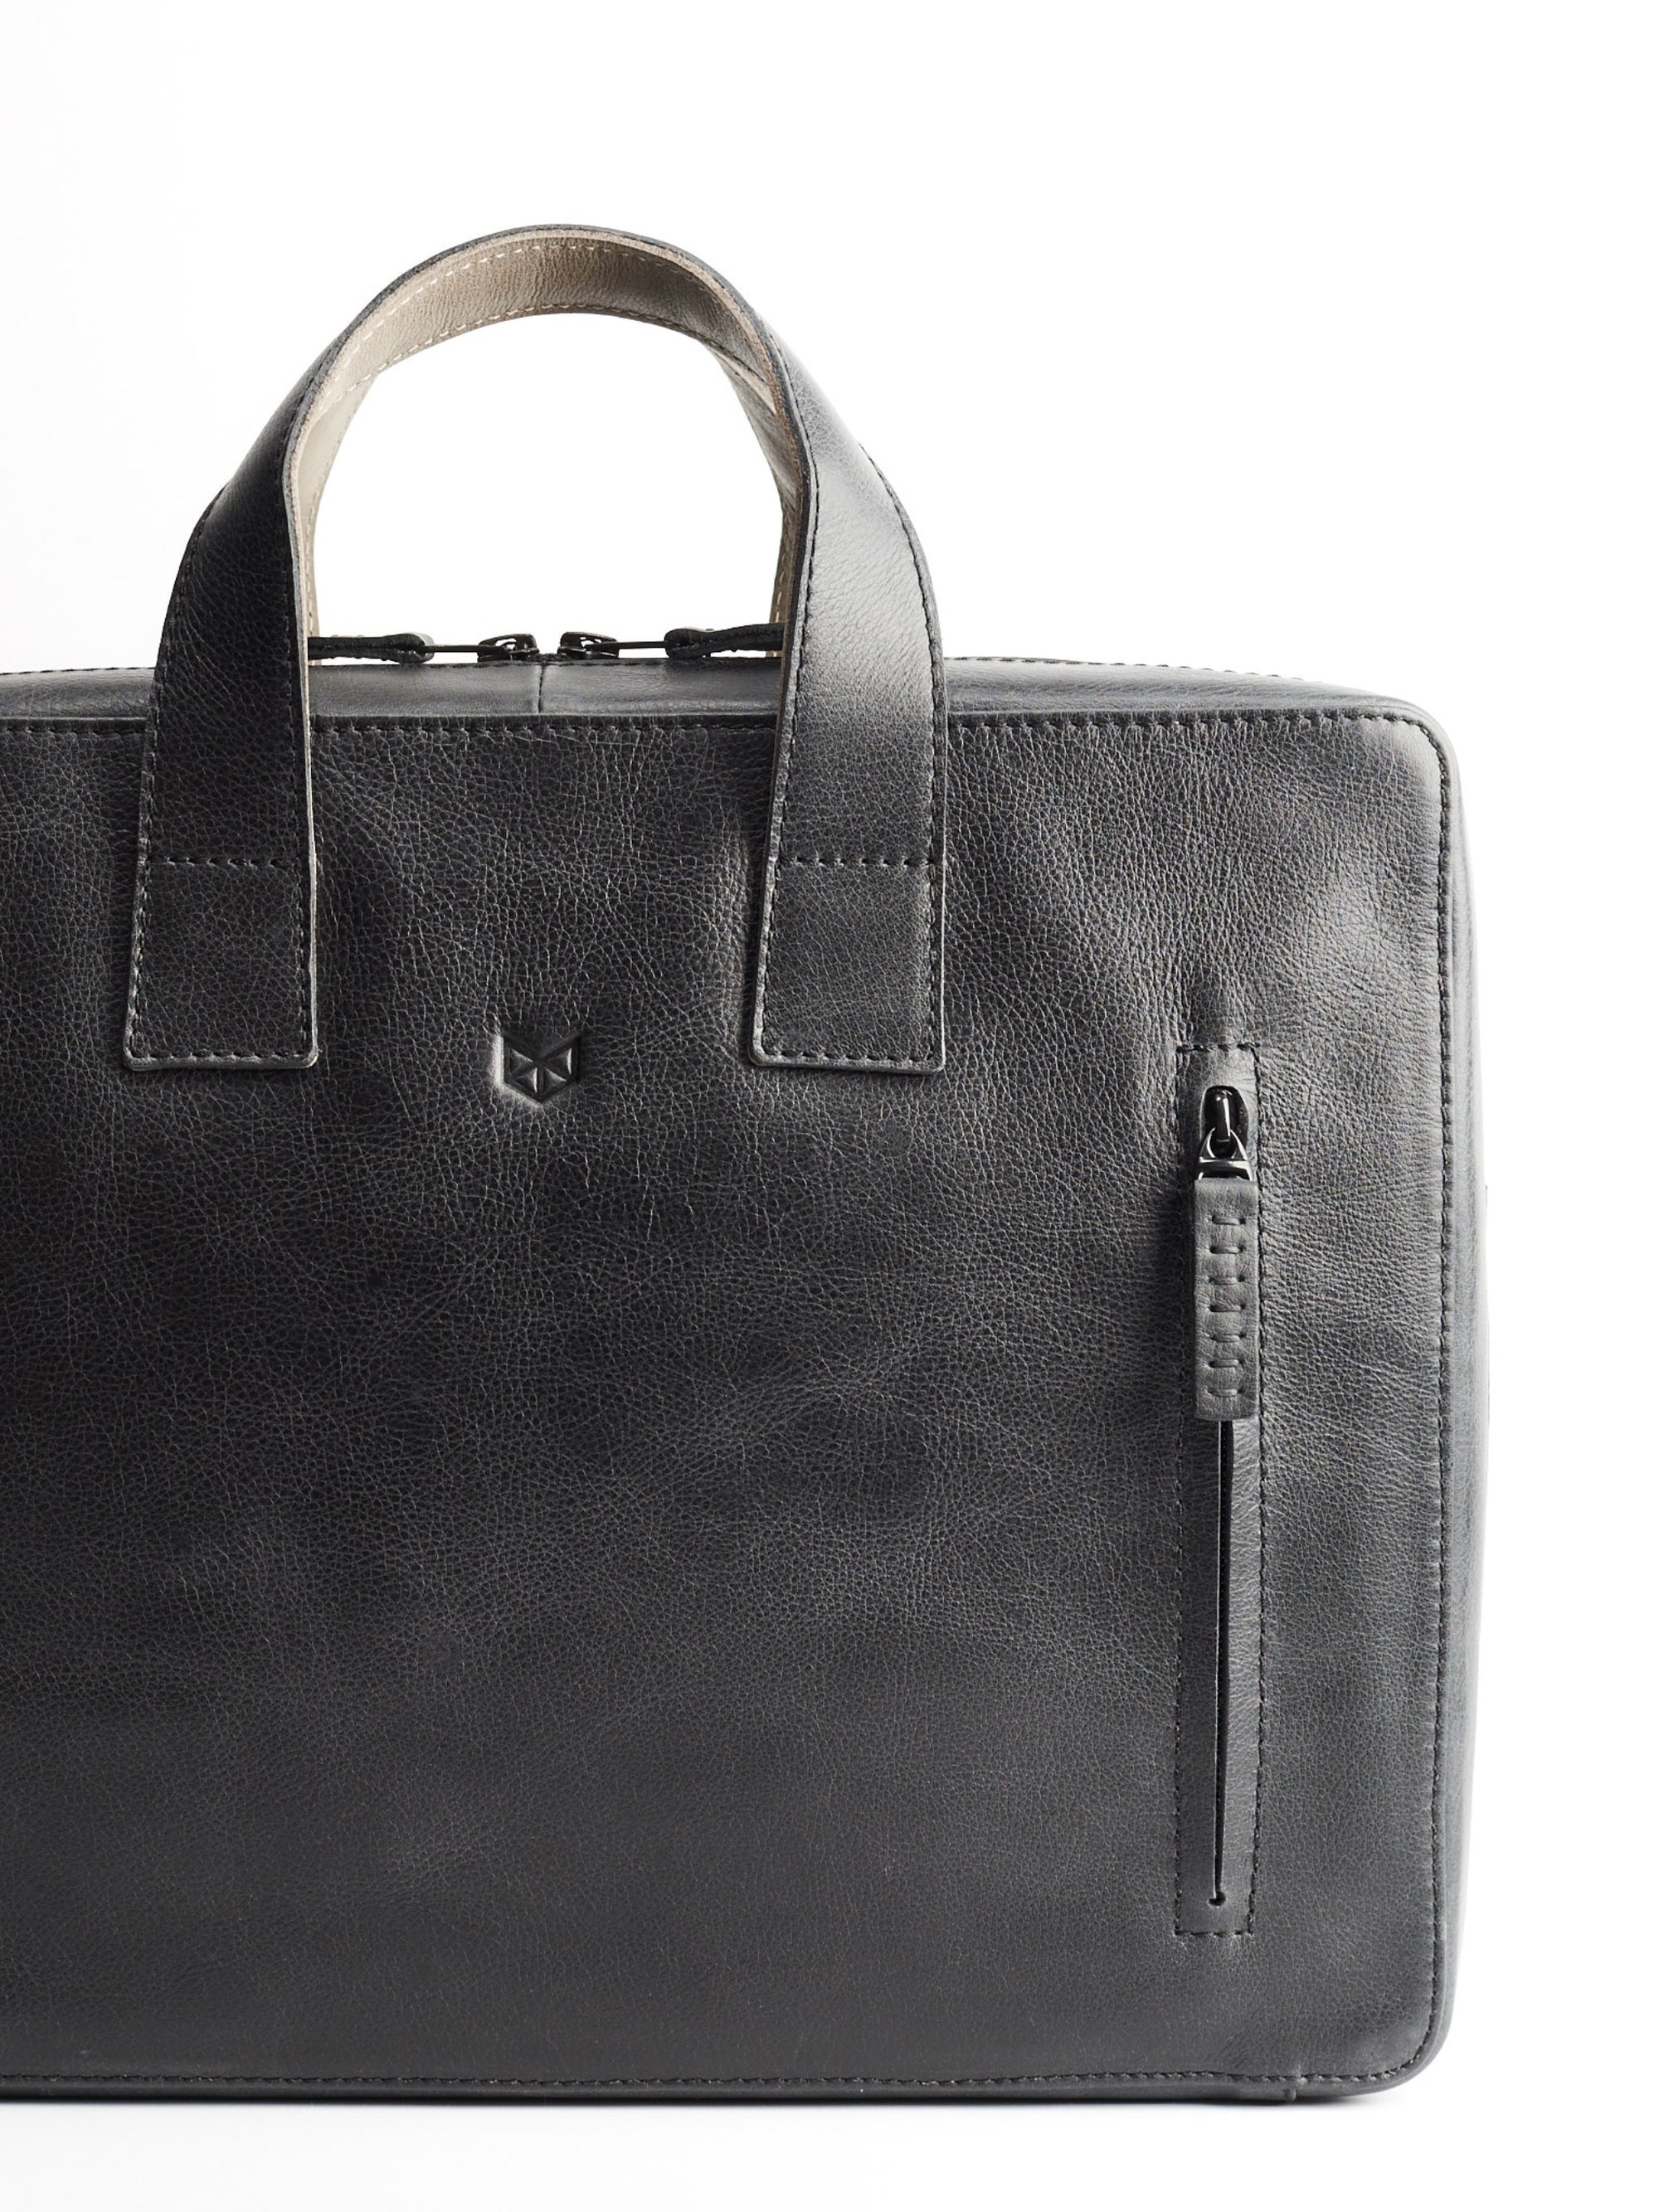 Roko briefcase black by Capra Leather